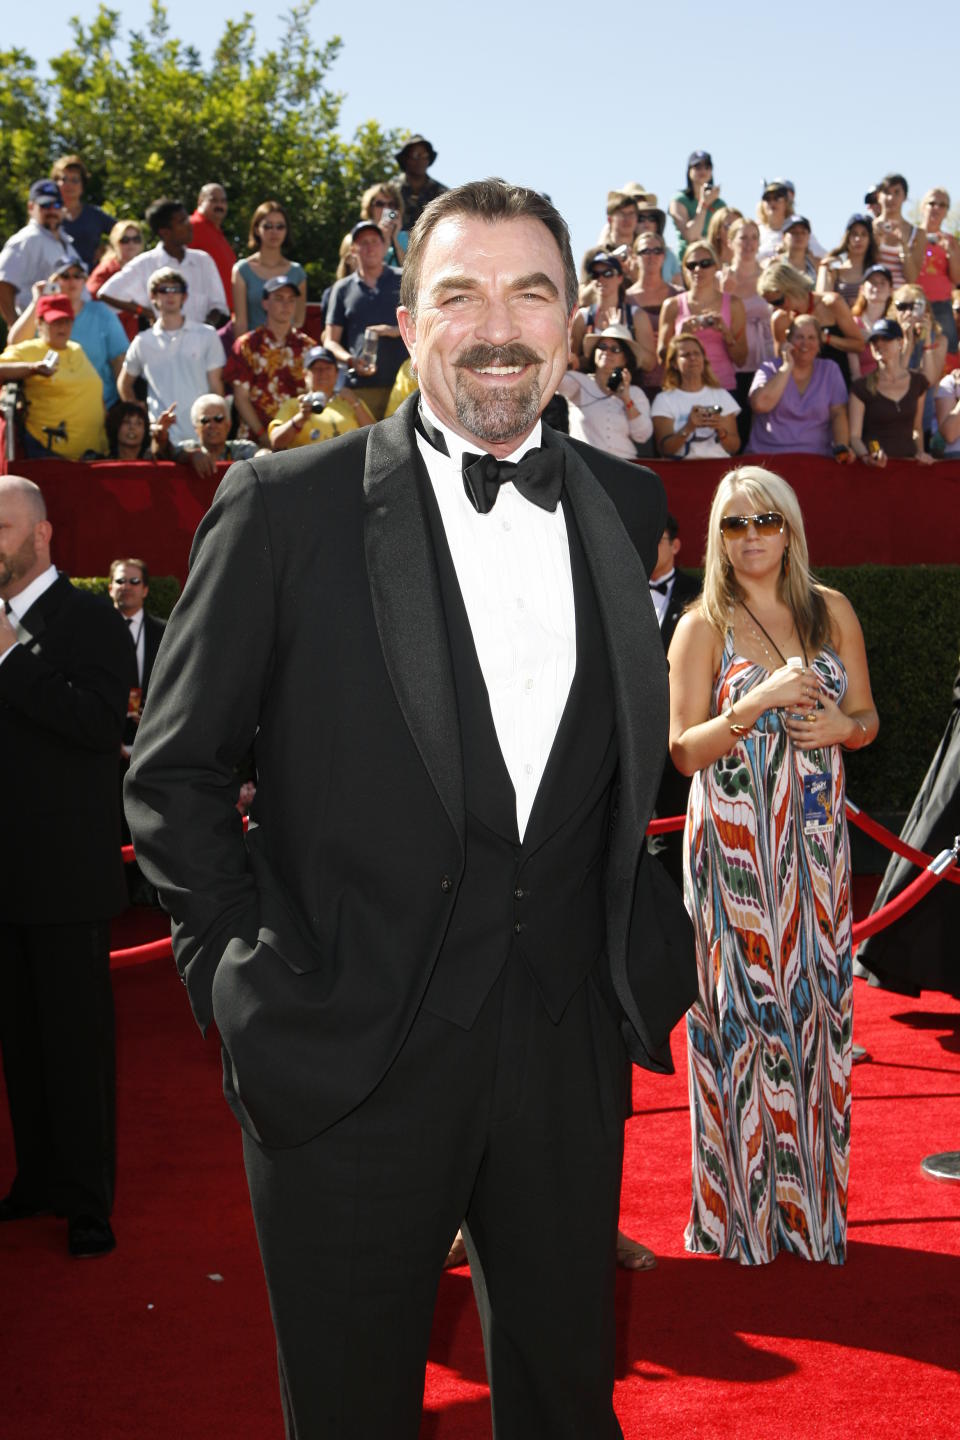 Actor Tom Selleck attends the 58th Annual Primetime Emmy Awards at the Shrine Auditorium.